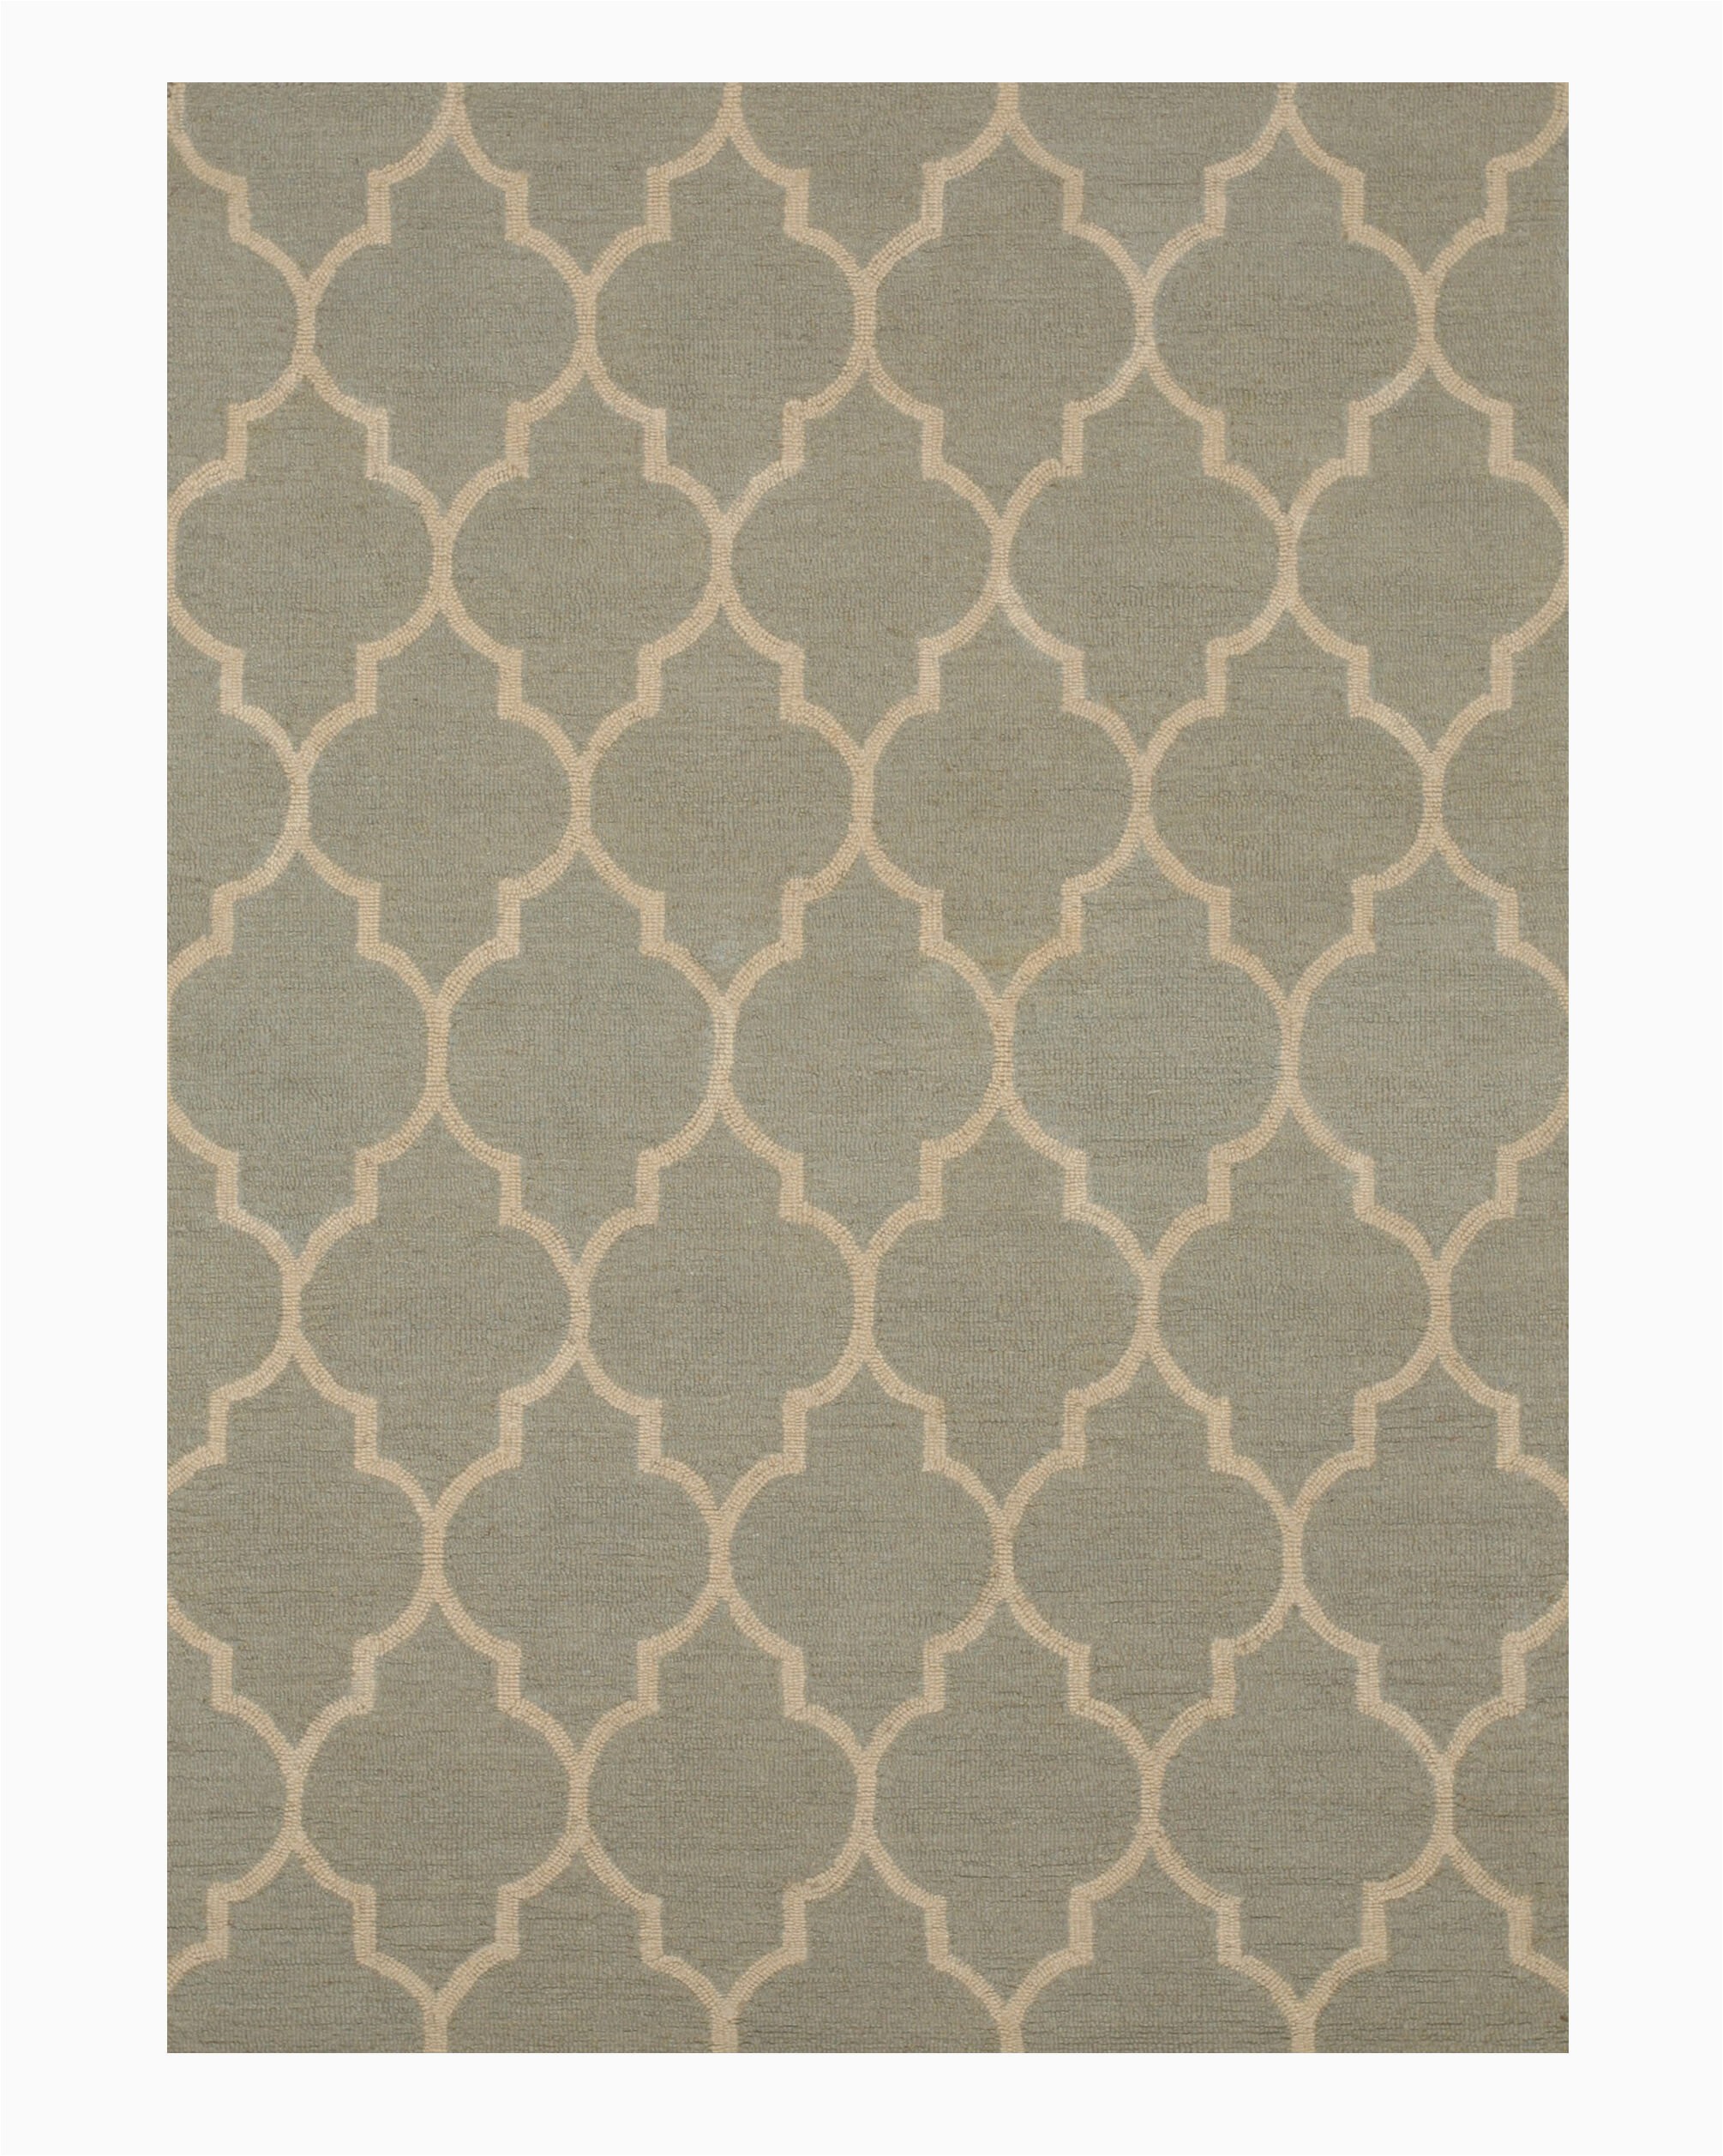 durrant wool traditional trellis hand tufted light green area rug